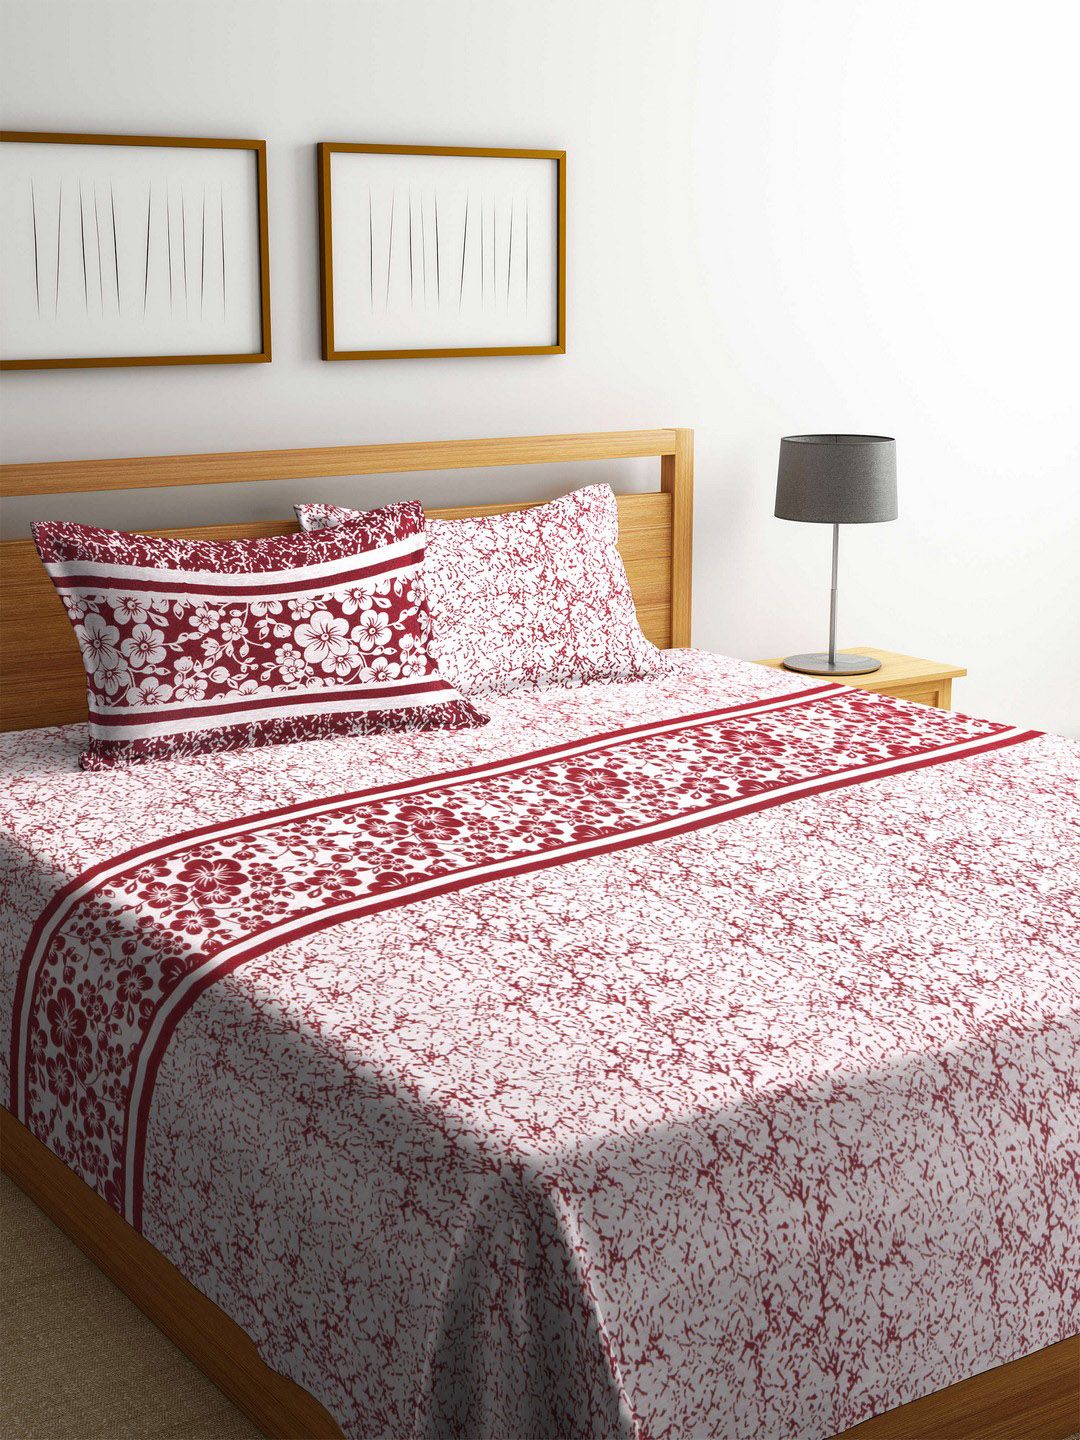 Romee Red & White Printed Polycotton Reversible Double Bed Cover with 2 Pillow Covers Price in India